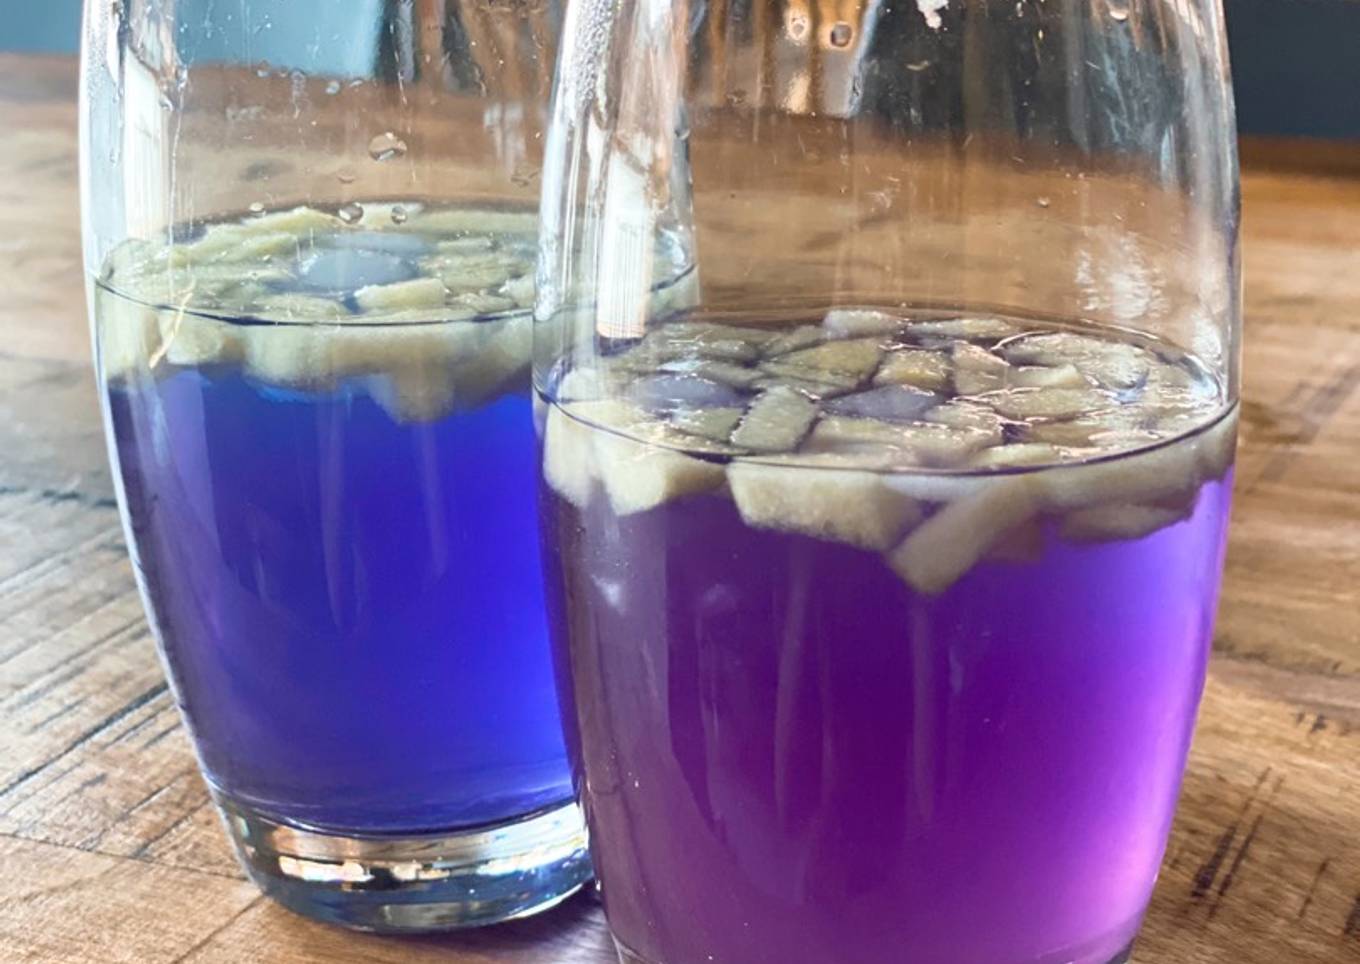 Butterfly pea iced tea - add lemon and the colour changes from blue to purple🪄🧚‍♀️